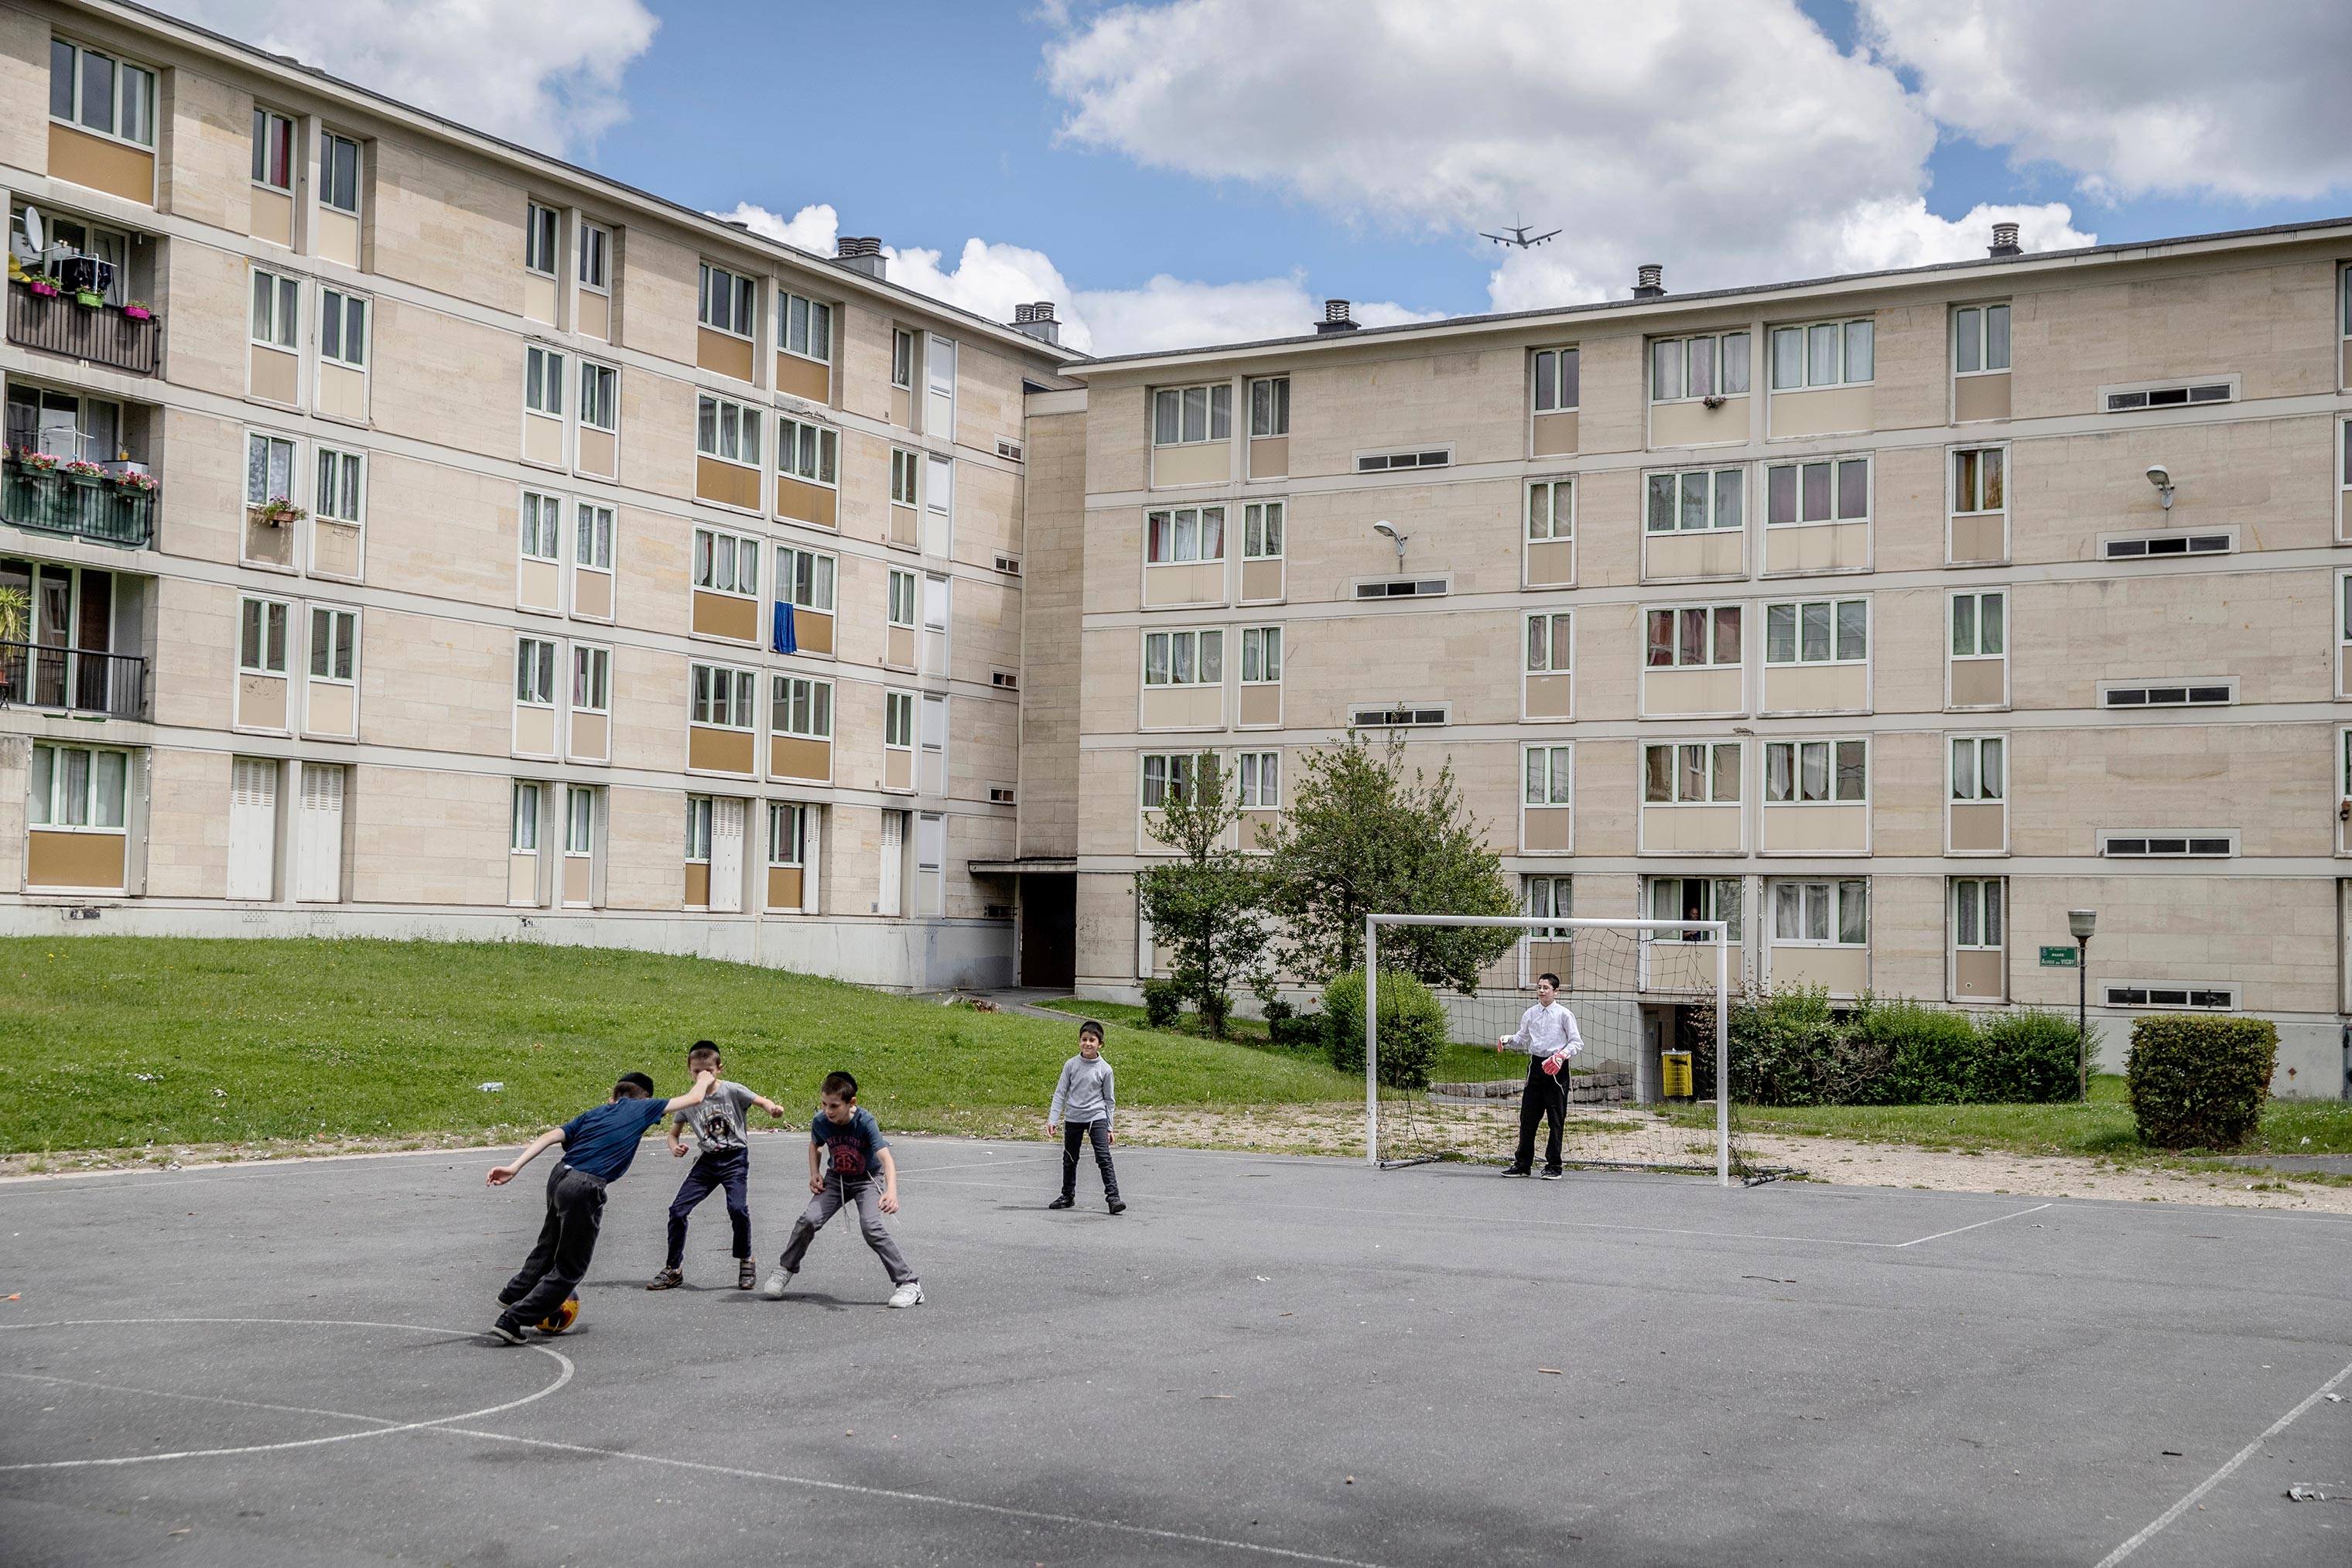 Children play in the Jewish quarter of Sarcelles, France. (Magnus Wennman for TIME)